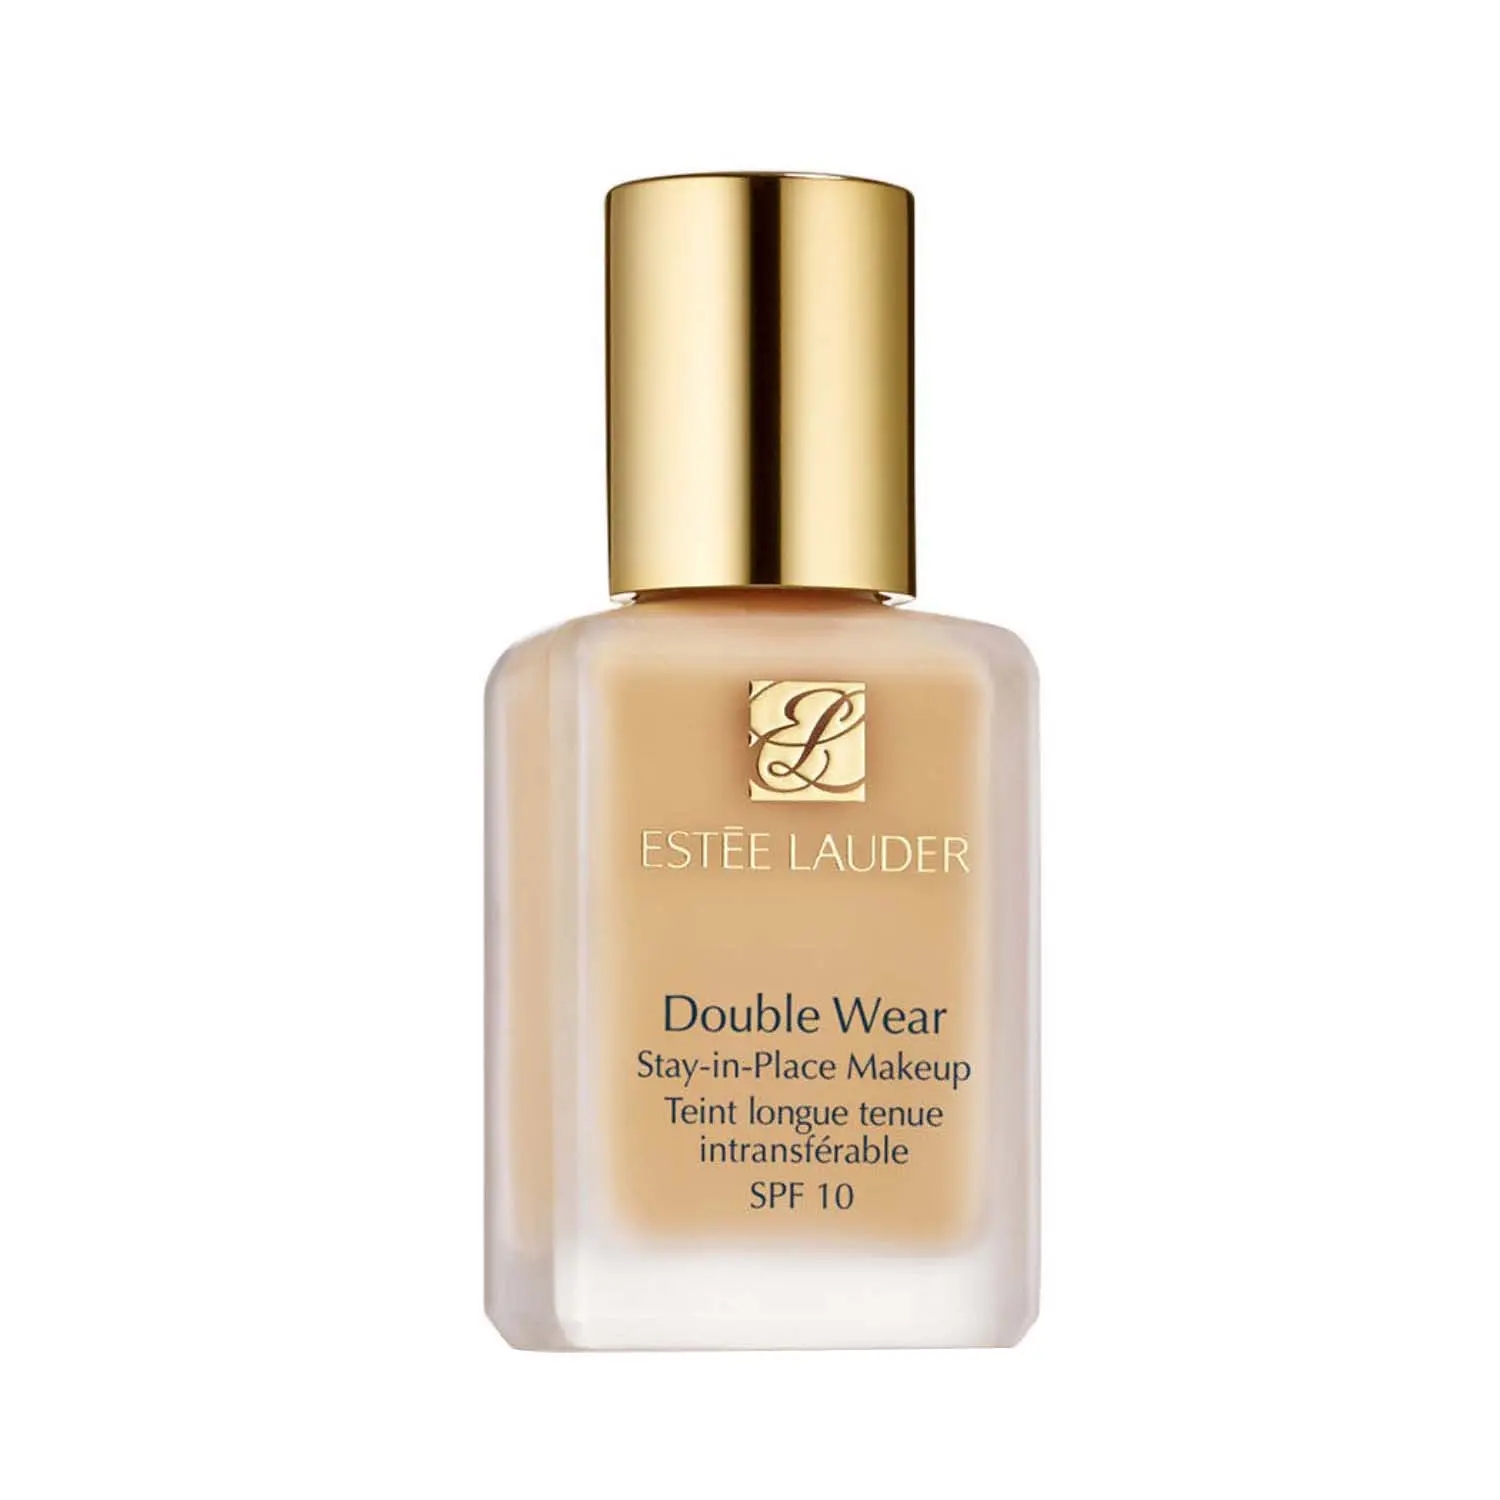 Estee Lauder | Estee Lauder Double Wear Stay-In-Place Makeup Foundation SPF 10 - 1N1 Ivory Nude (30ml)